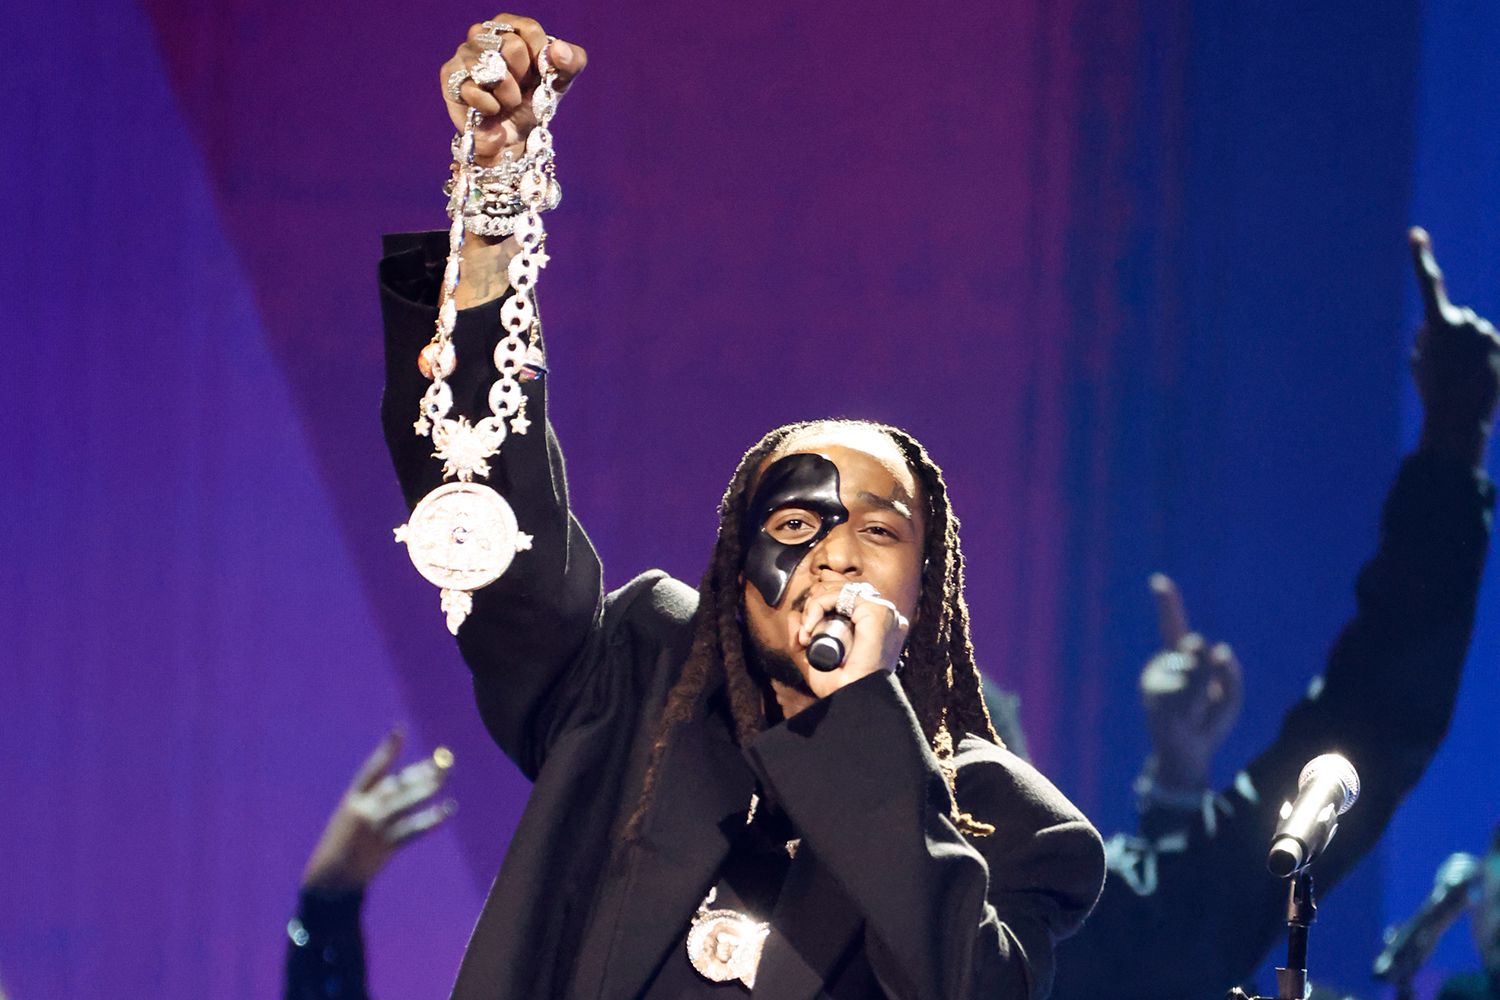 , Quavo performing a tribute to Takeoff at the Grammys 2023., Hustle Franklins